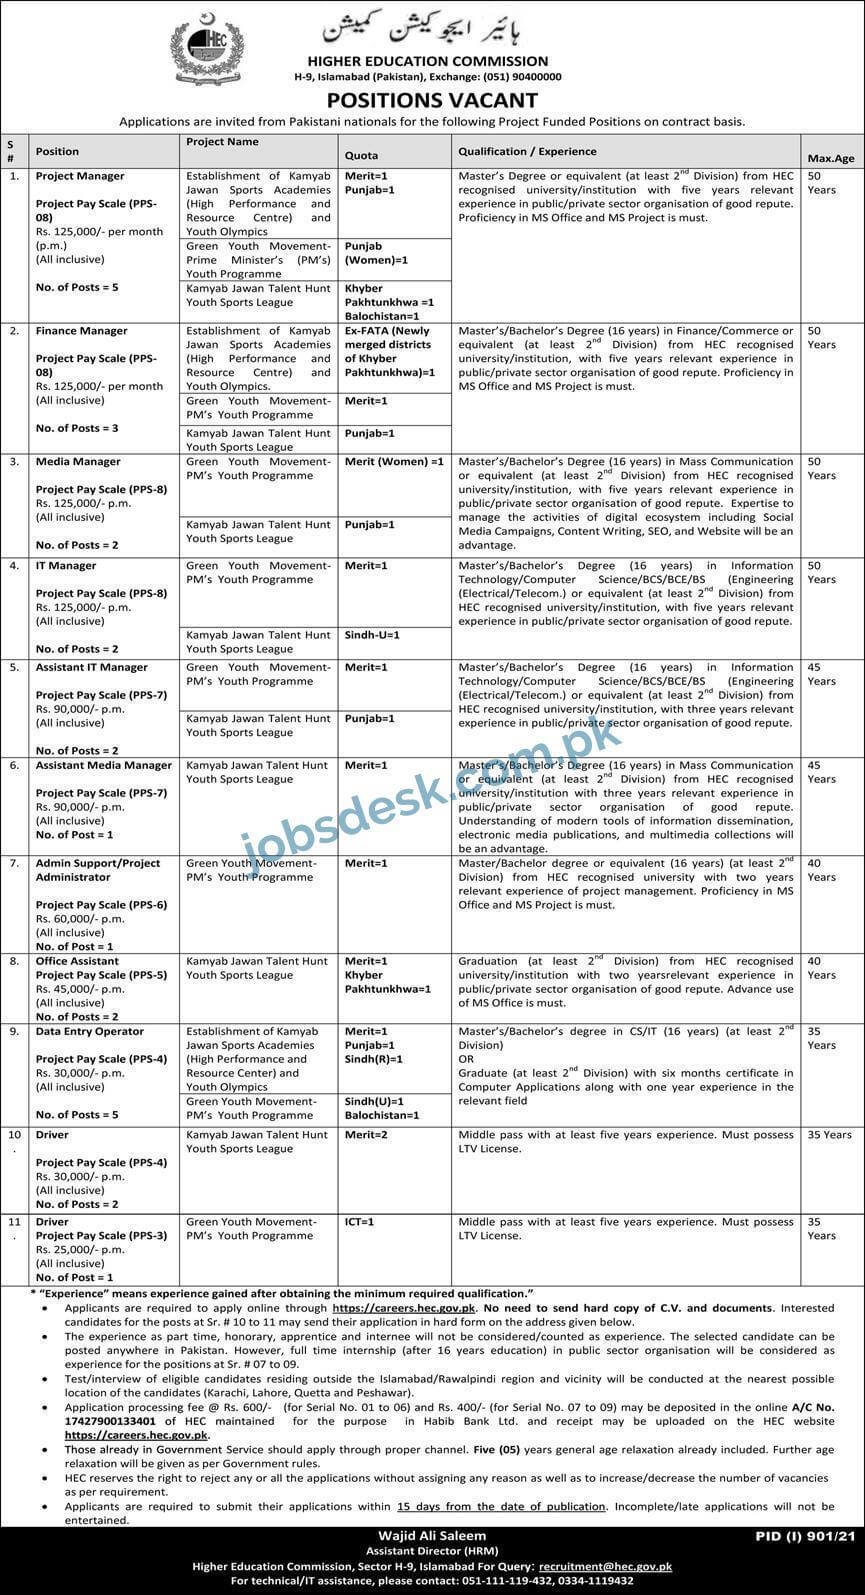 Higher Education Commission HEC Jobs in Islamabad 2021